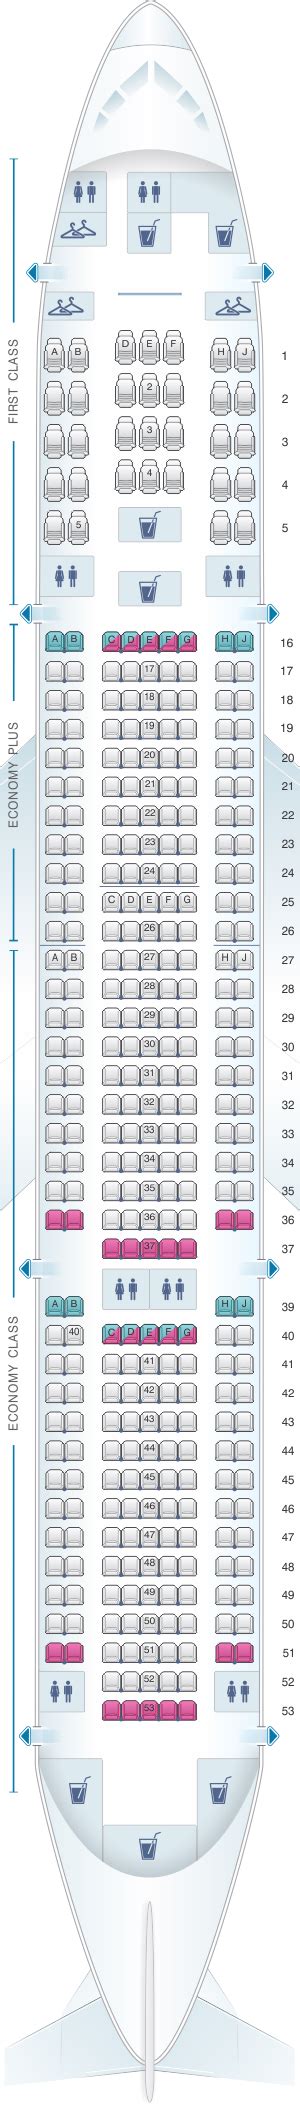 Boeing United Airlines Seat Map Porn Sex Picture